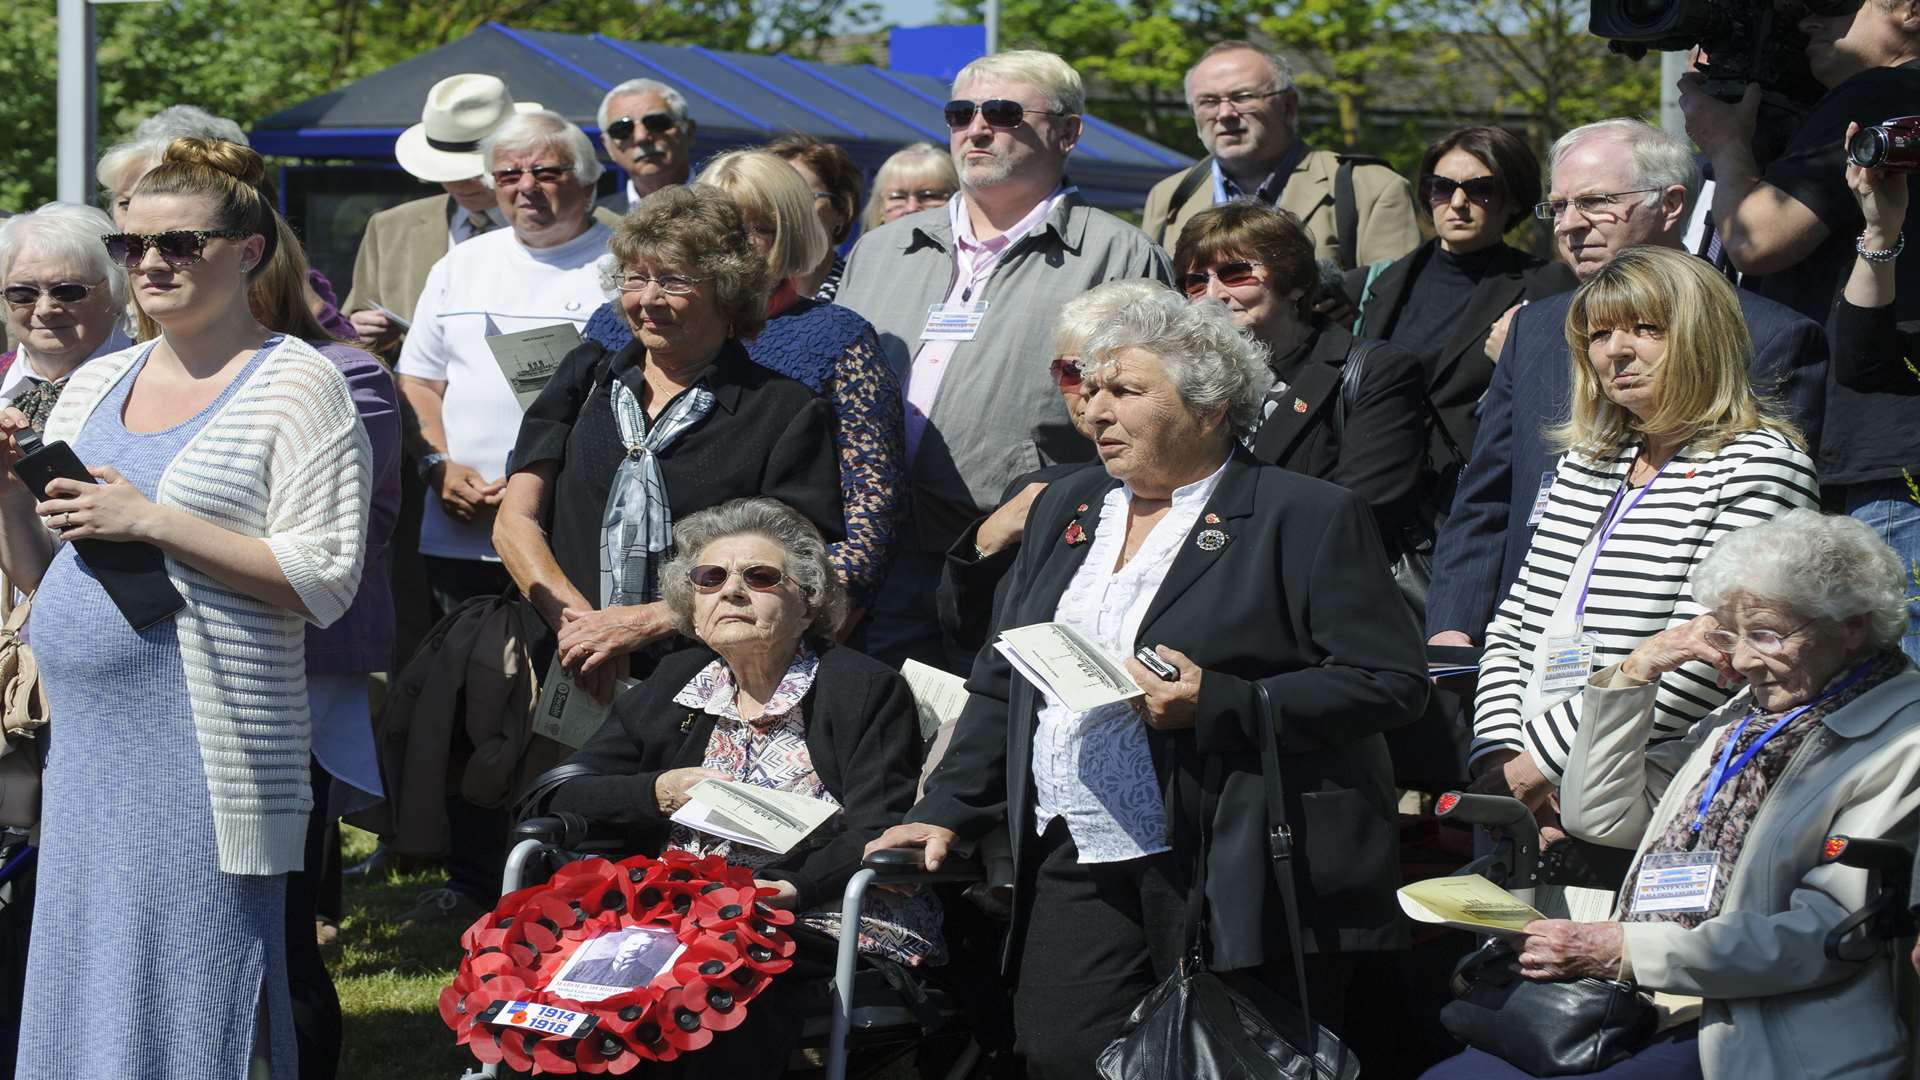 Members of the public, including families of those killed, at the memorial service.